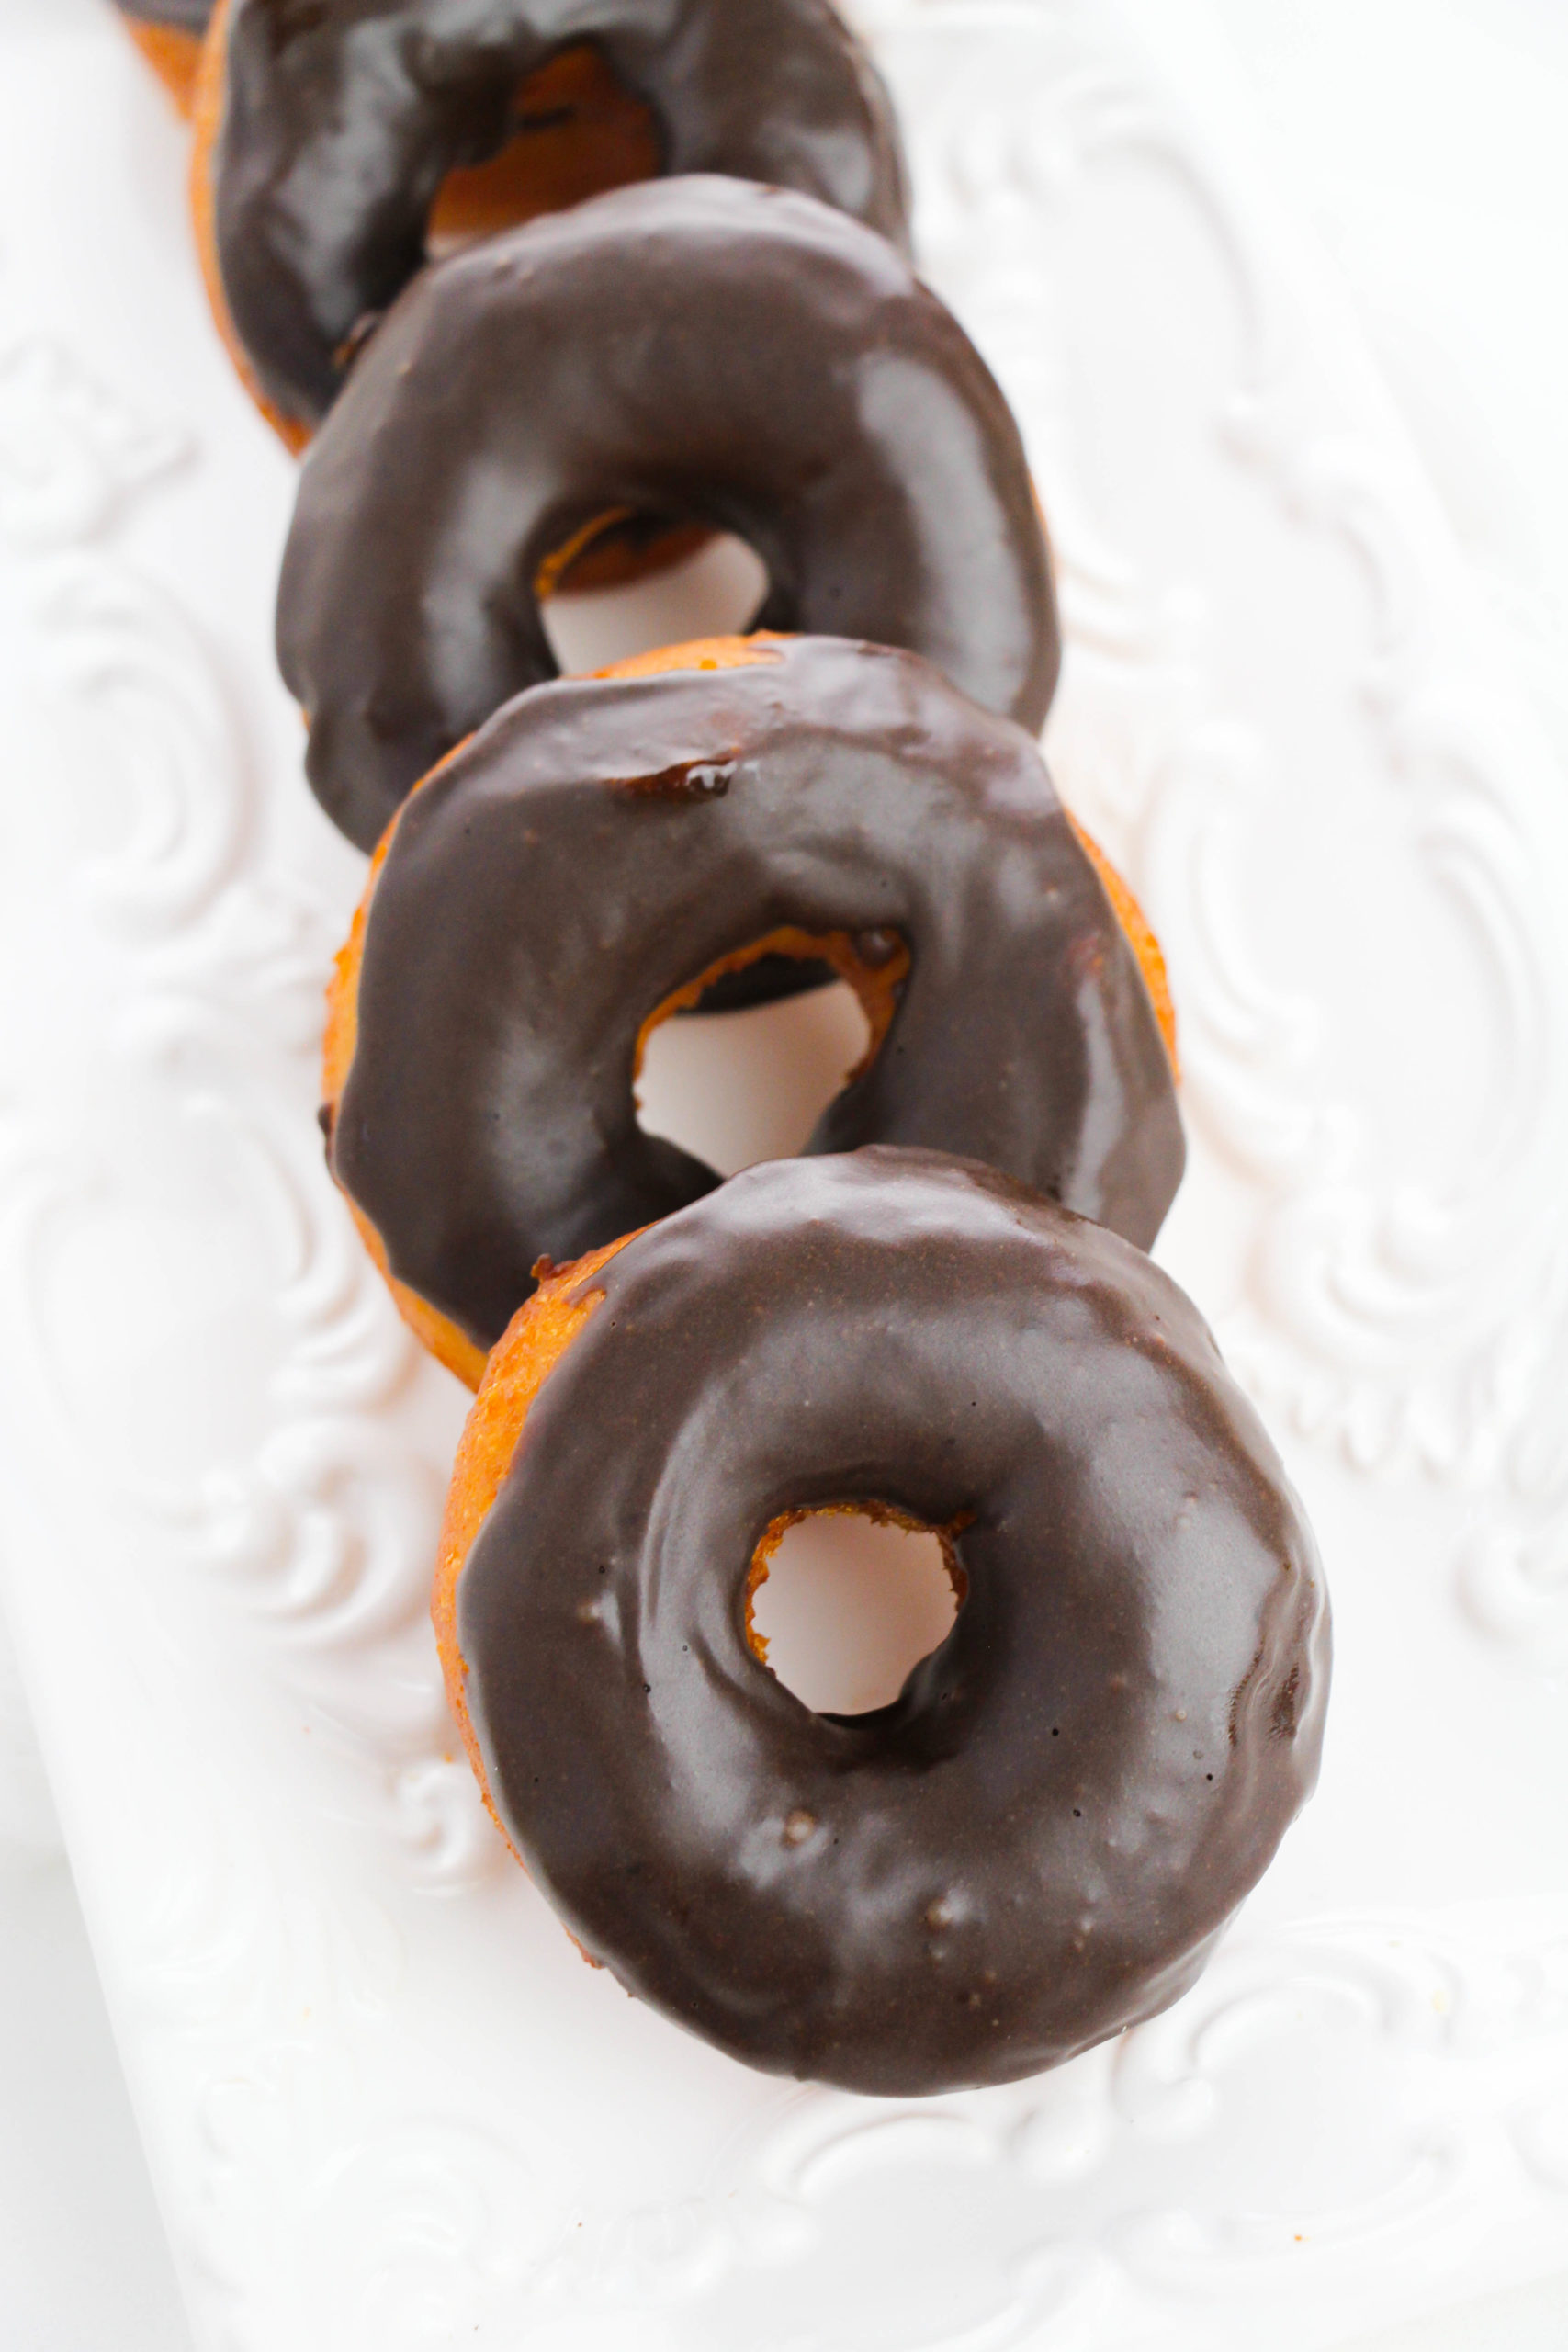 Chocolate Glazed Biscuit Donuts on a white plate